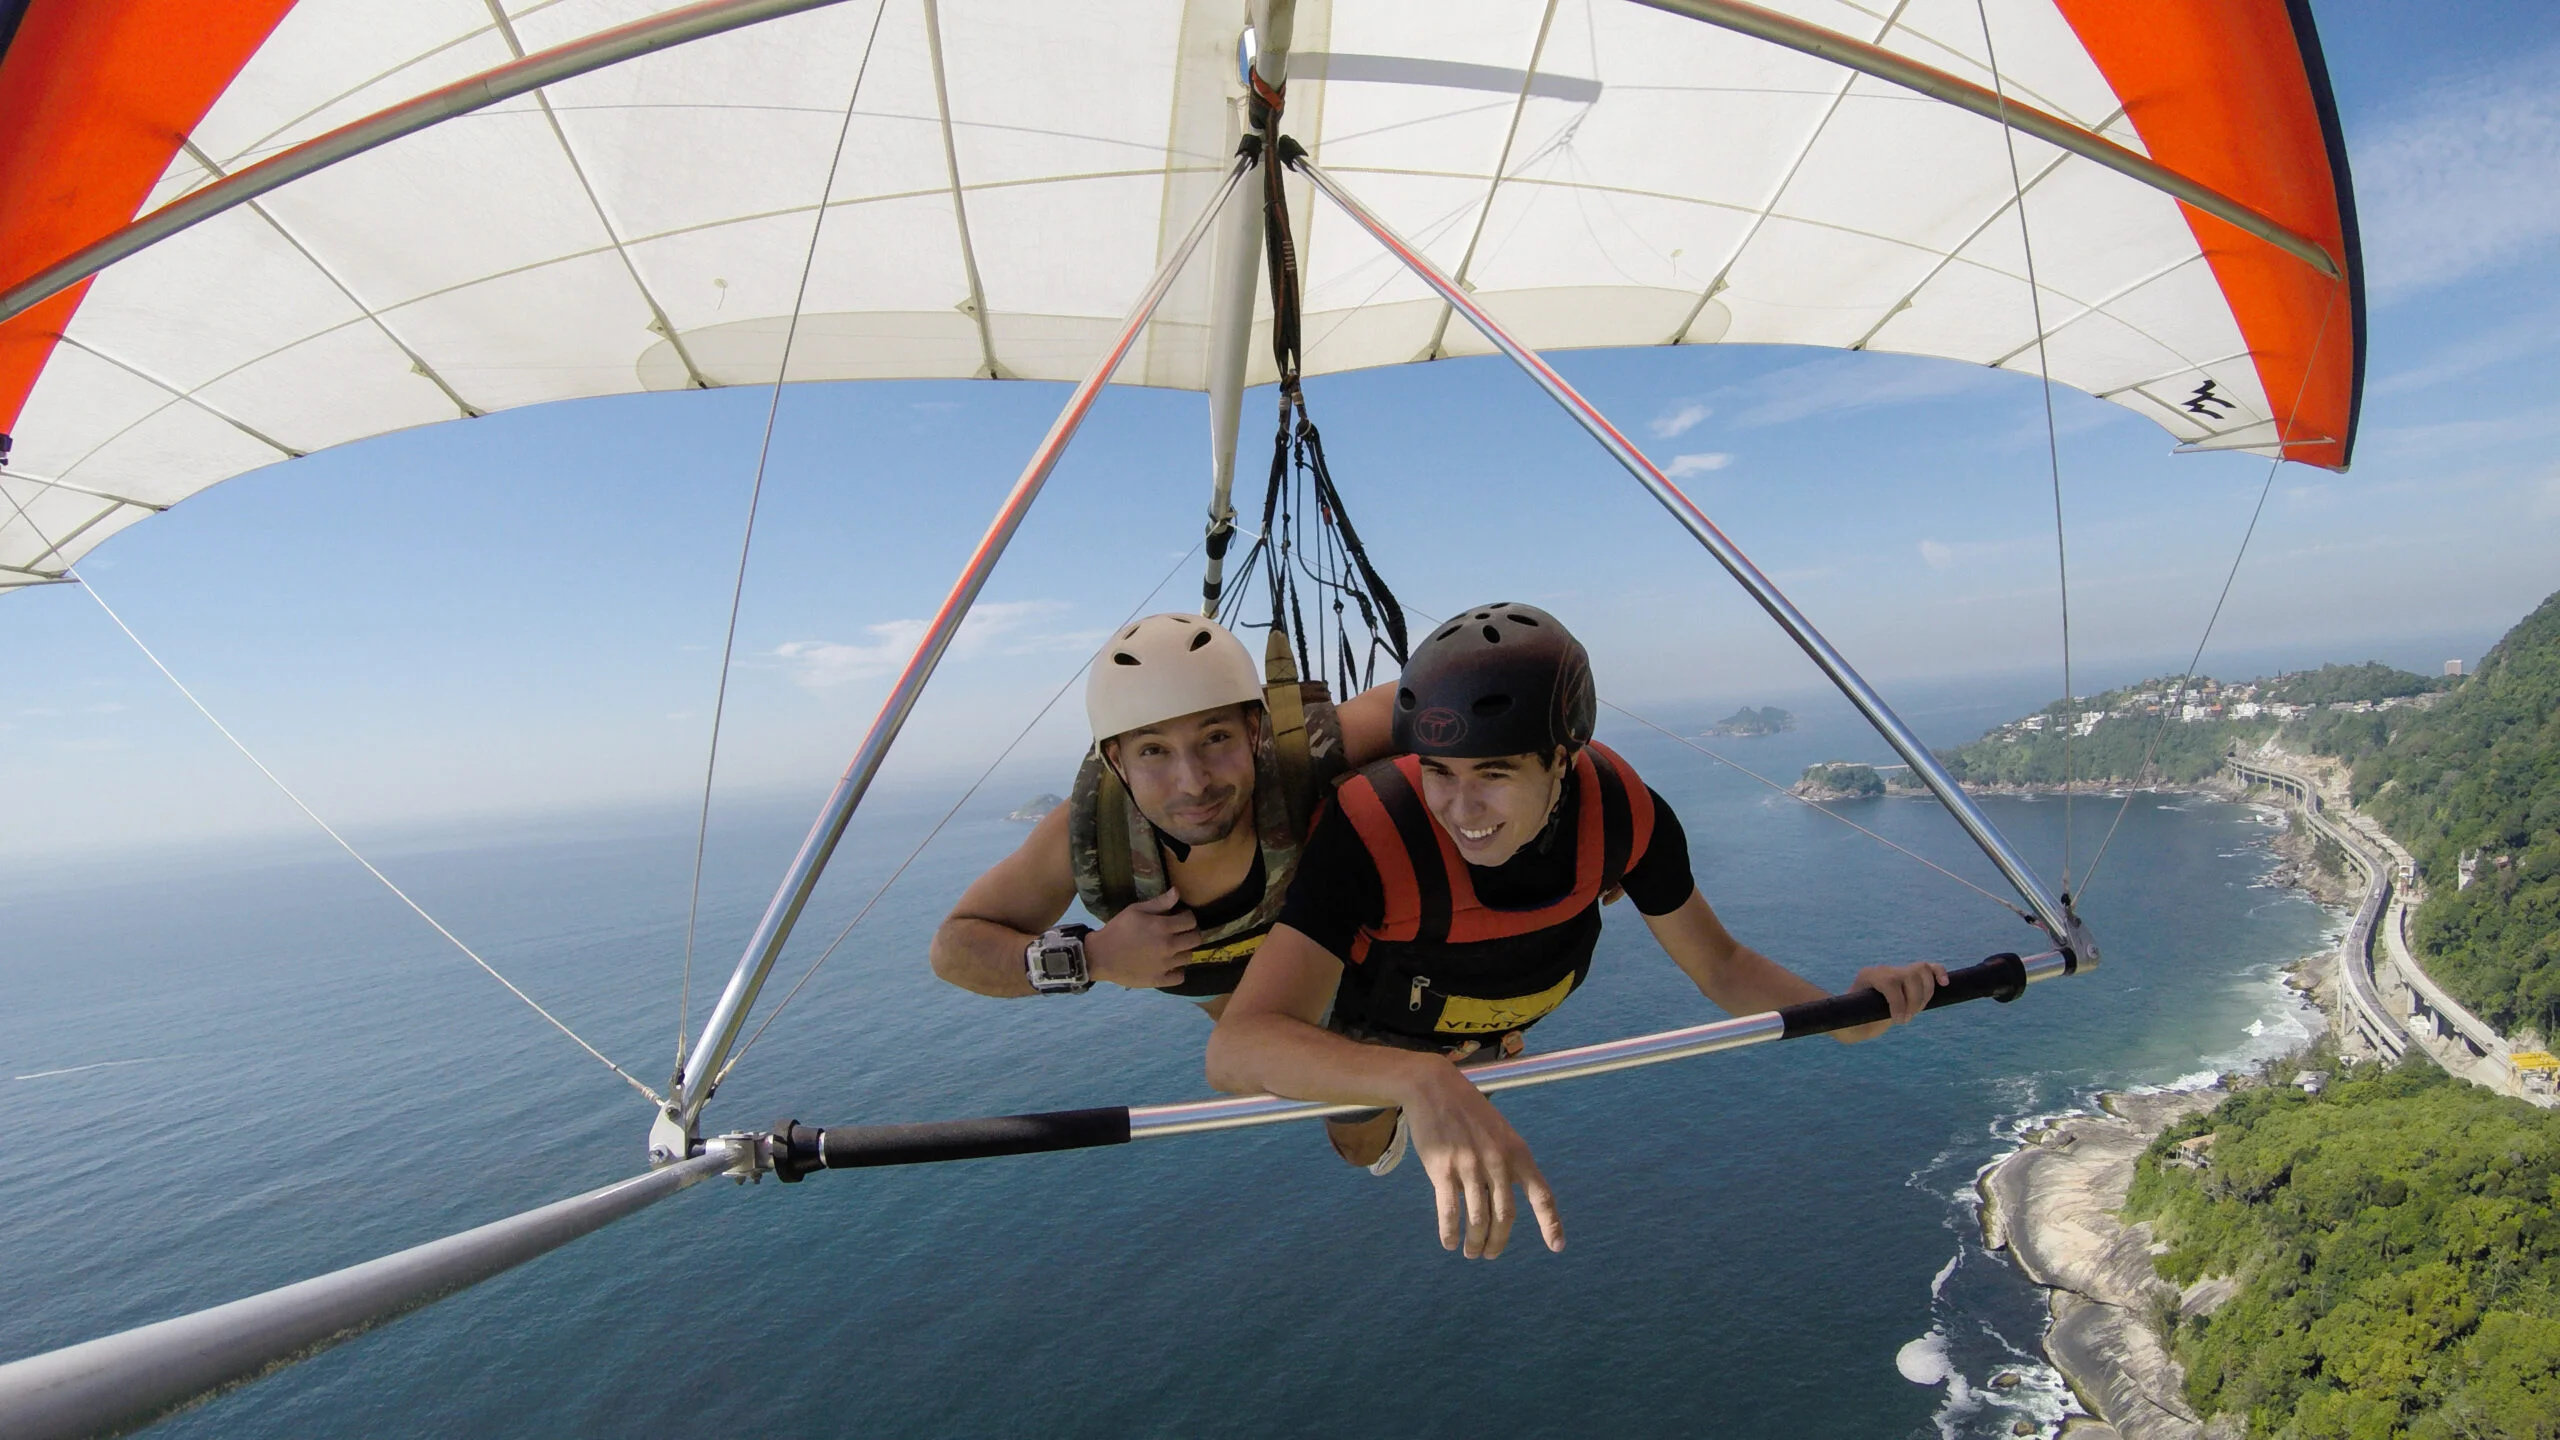 Hang Gliding: Tandem, The flight with an expert instructor,  An extended flight. 2560x1440 HD Background.